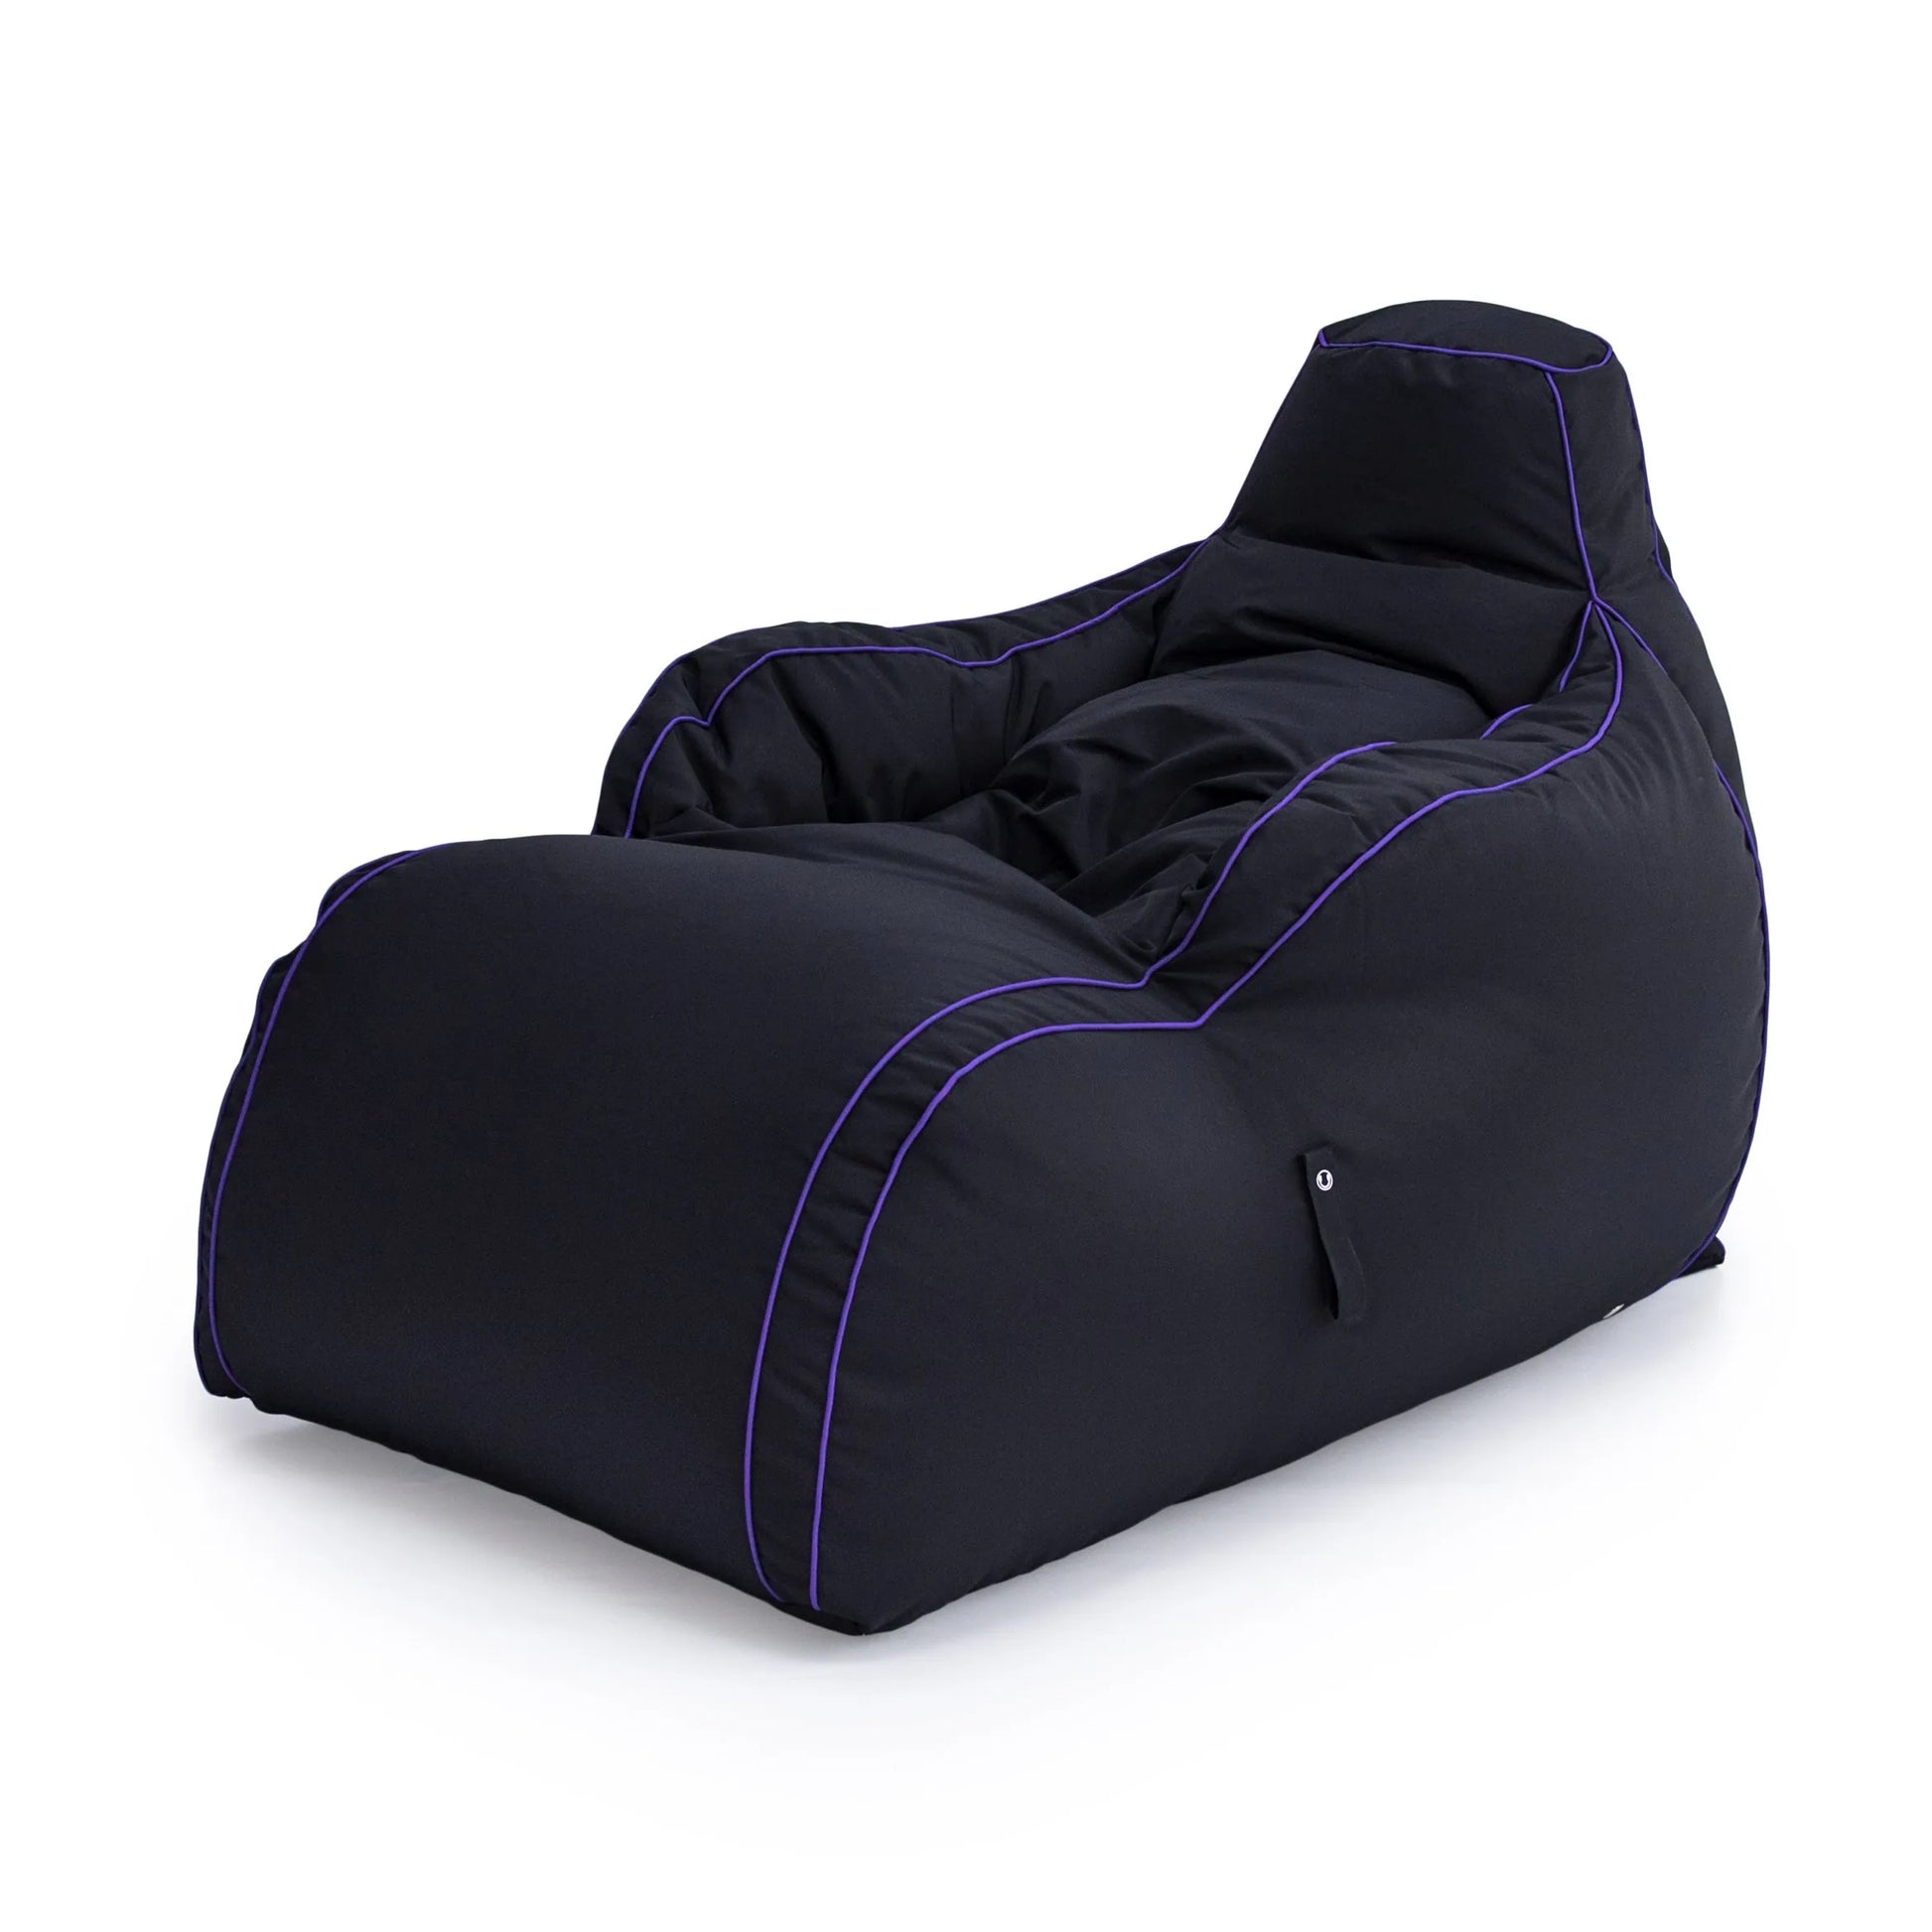 A black bean bag chair with purple trim sits on a white background.